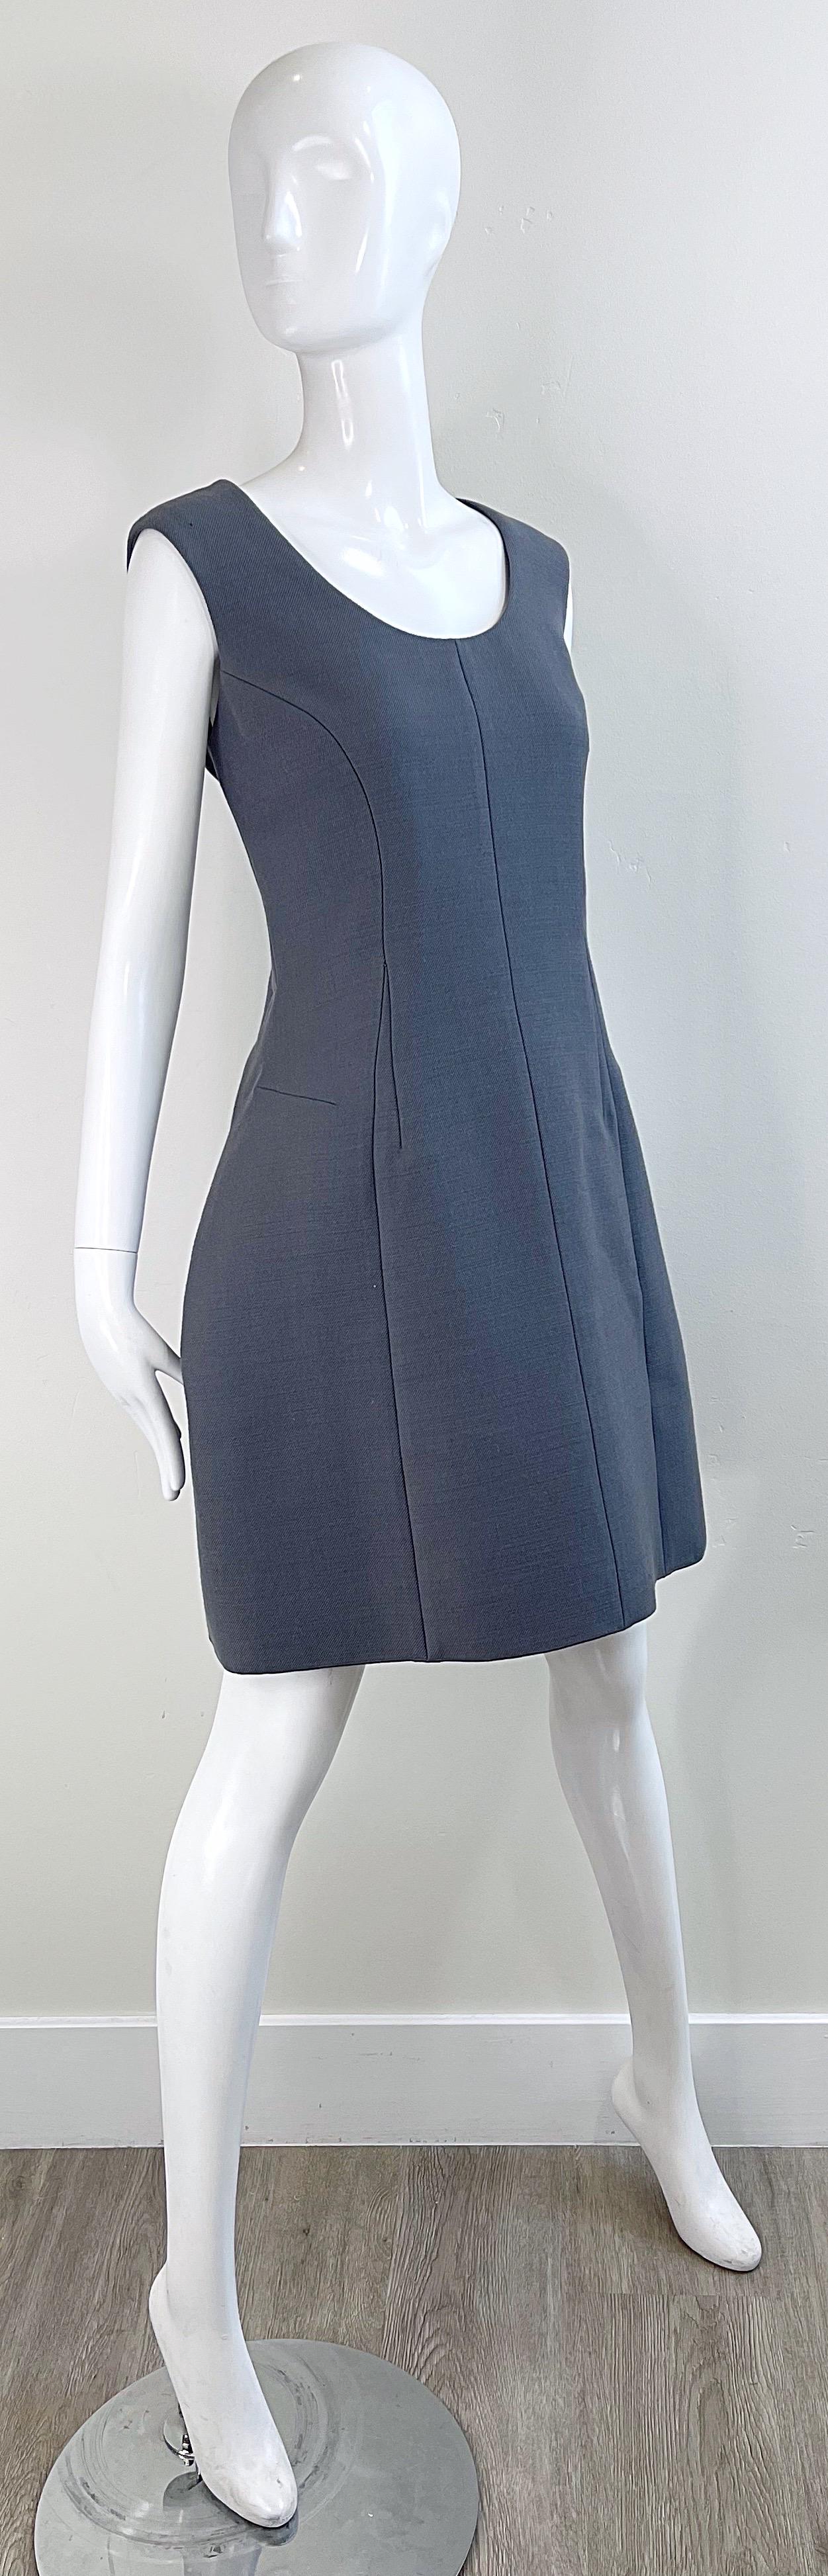 NWT Marc Jacobs 2000s Size 8 Gray Tailored Wool Y2K Vintage Bustle Dress For Sale 1